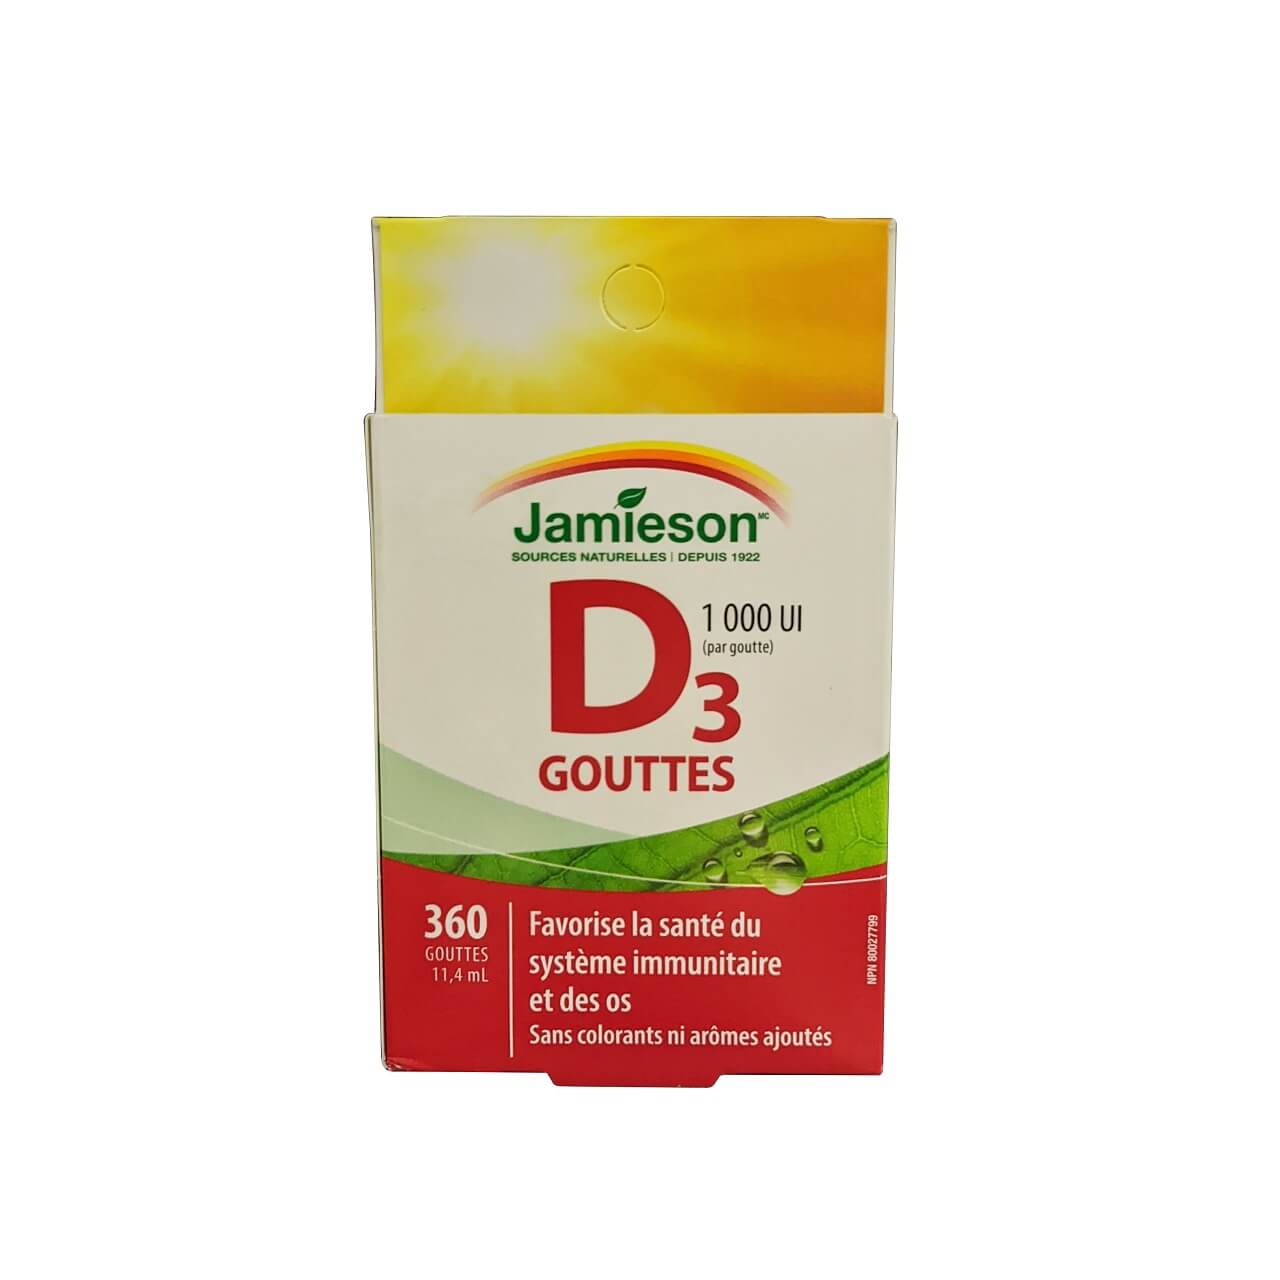 Product label for Jamieson Vitamin D3 Drops 1000 IU (11.4 mL) in French